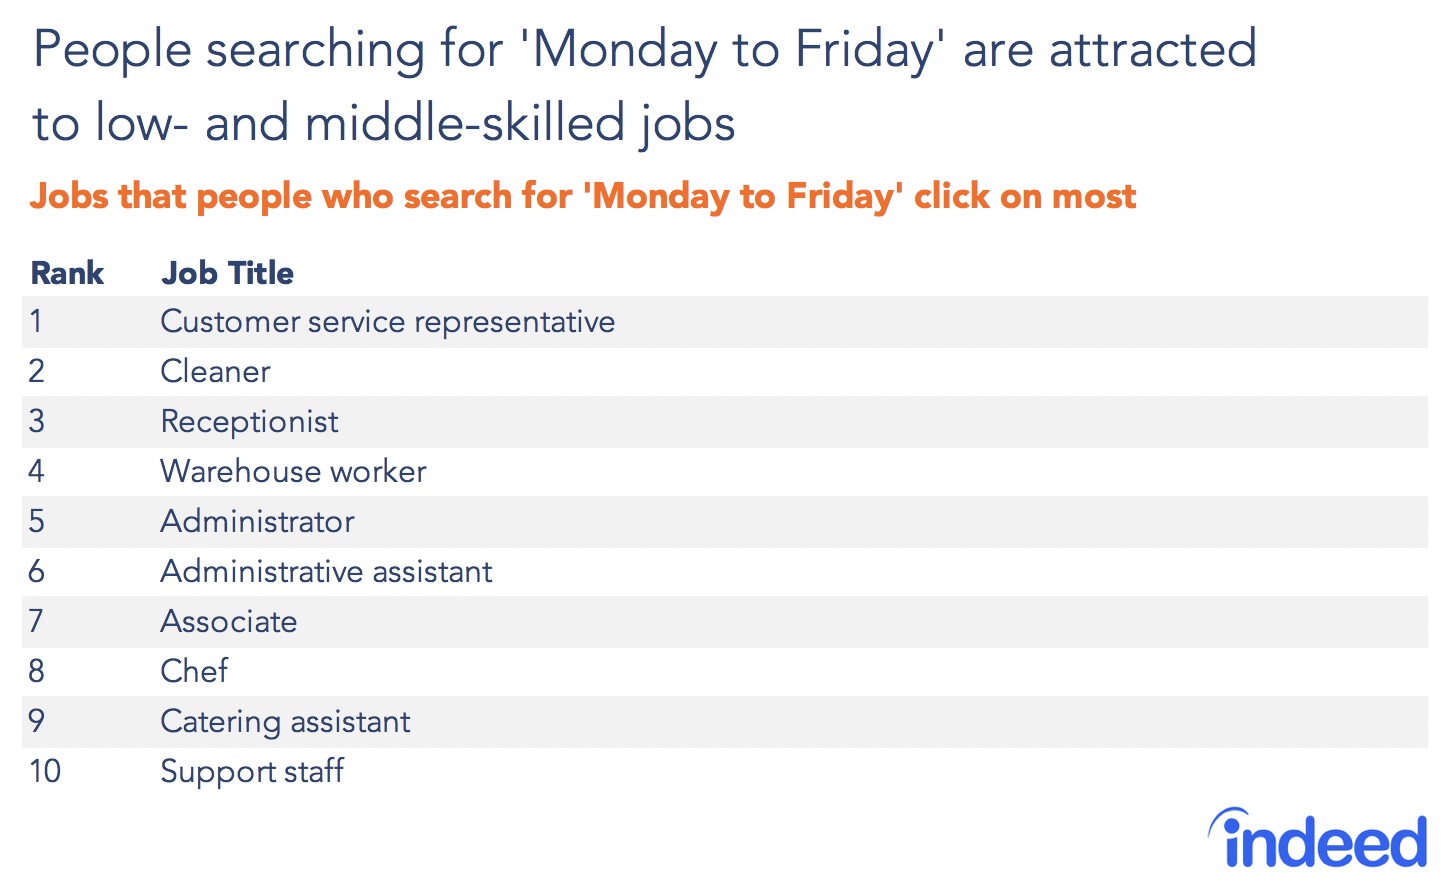 JPeople searching for 'monday to friday' are attracted to low or middle skilled jobs